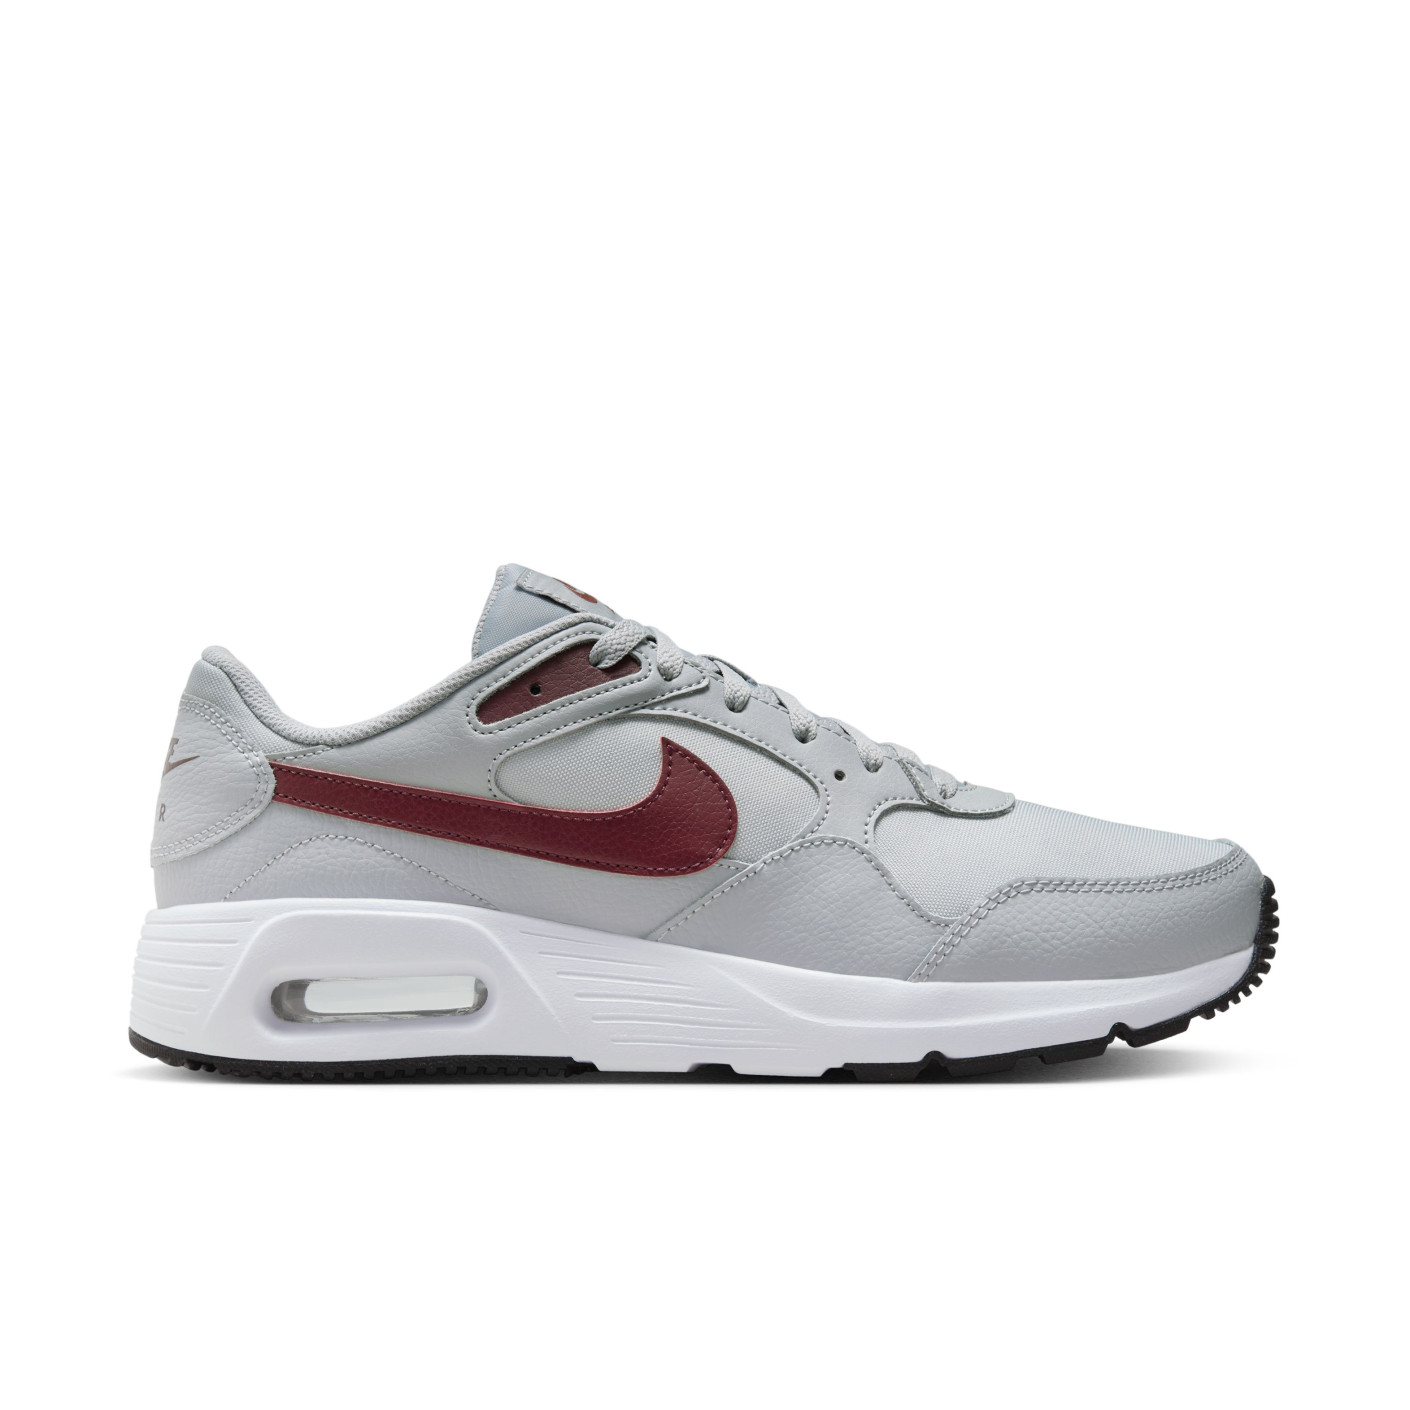 Nike Air Max Sneakers SC Lichtgrijs Donkerrood Wit